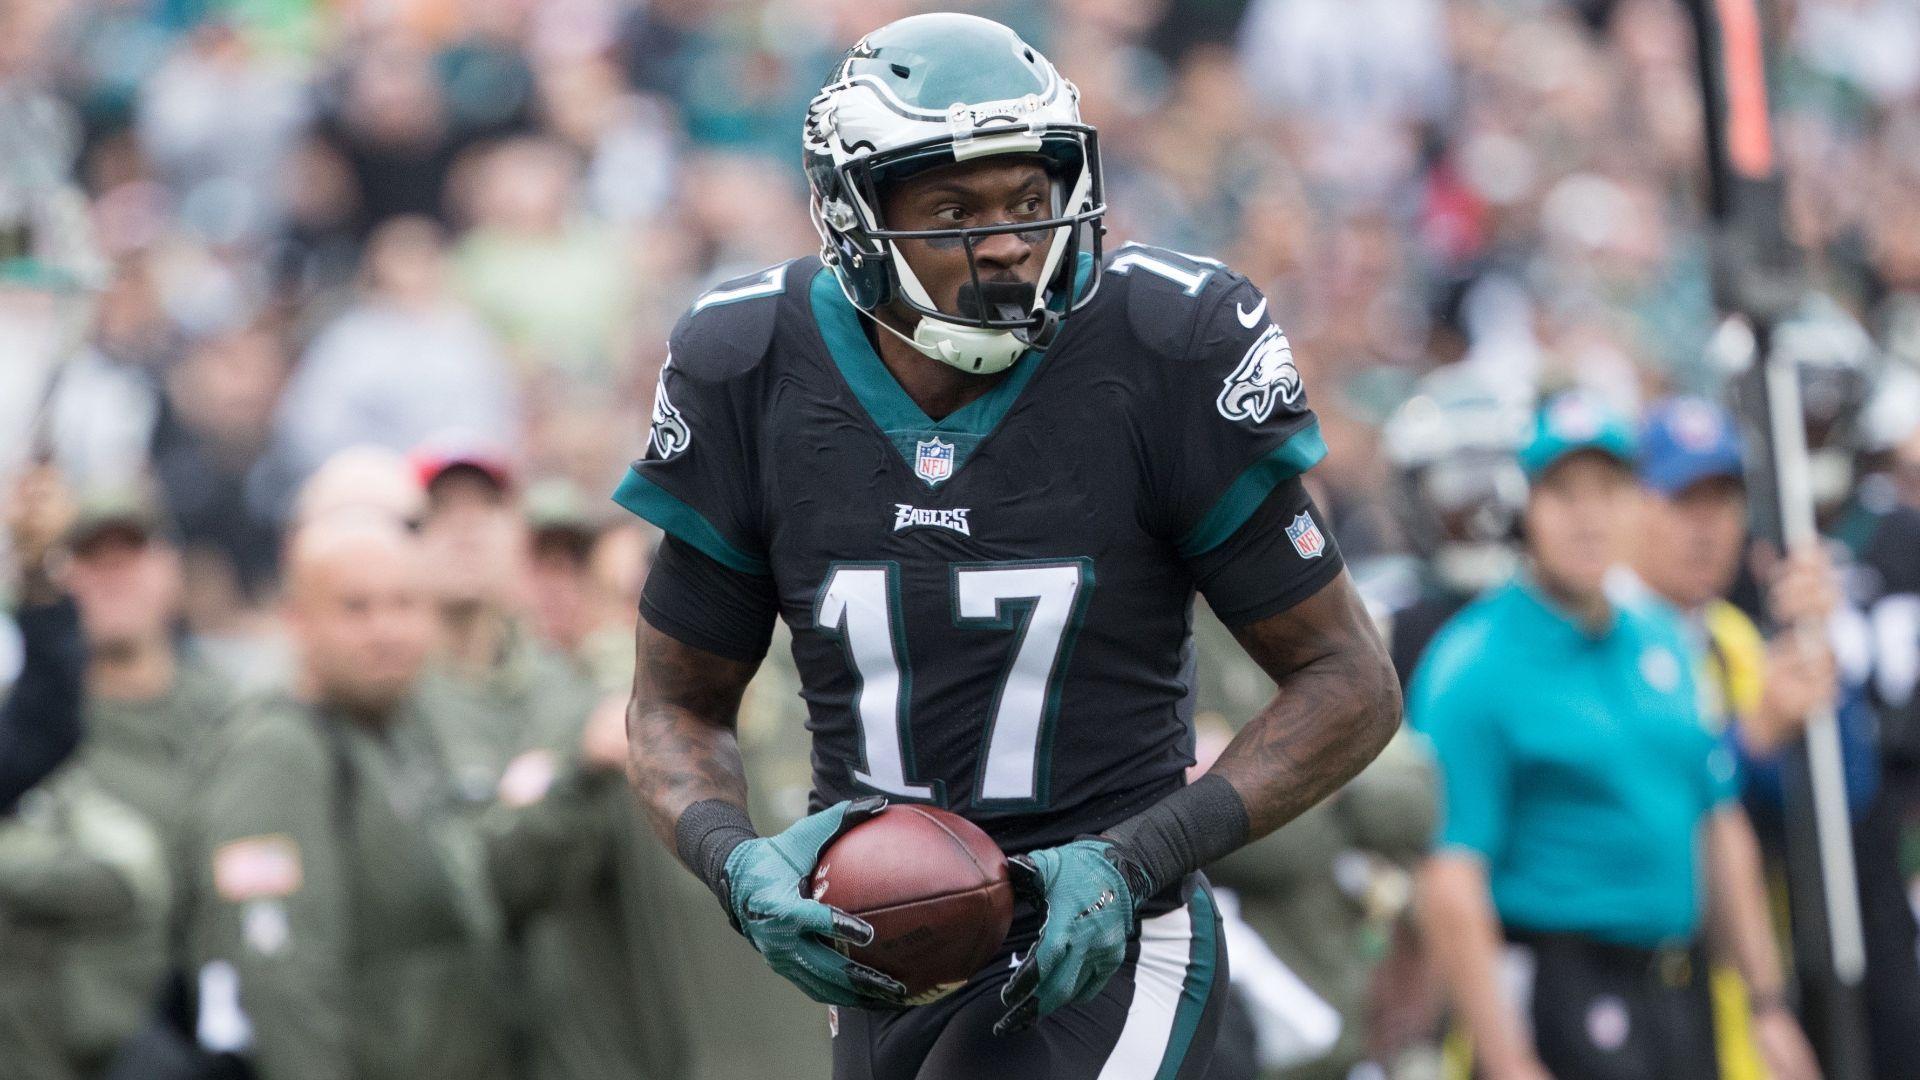 Eagles to release WR Alshon Jeffery after four seasons when league year starts